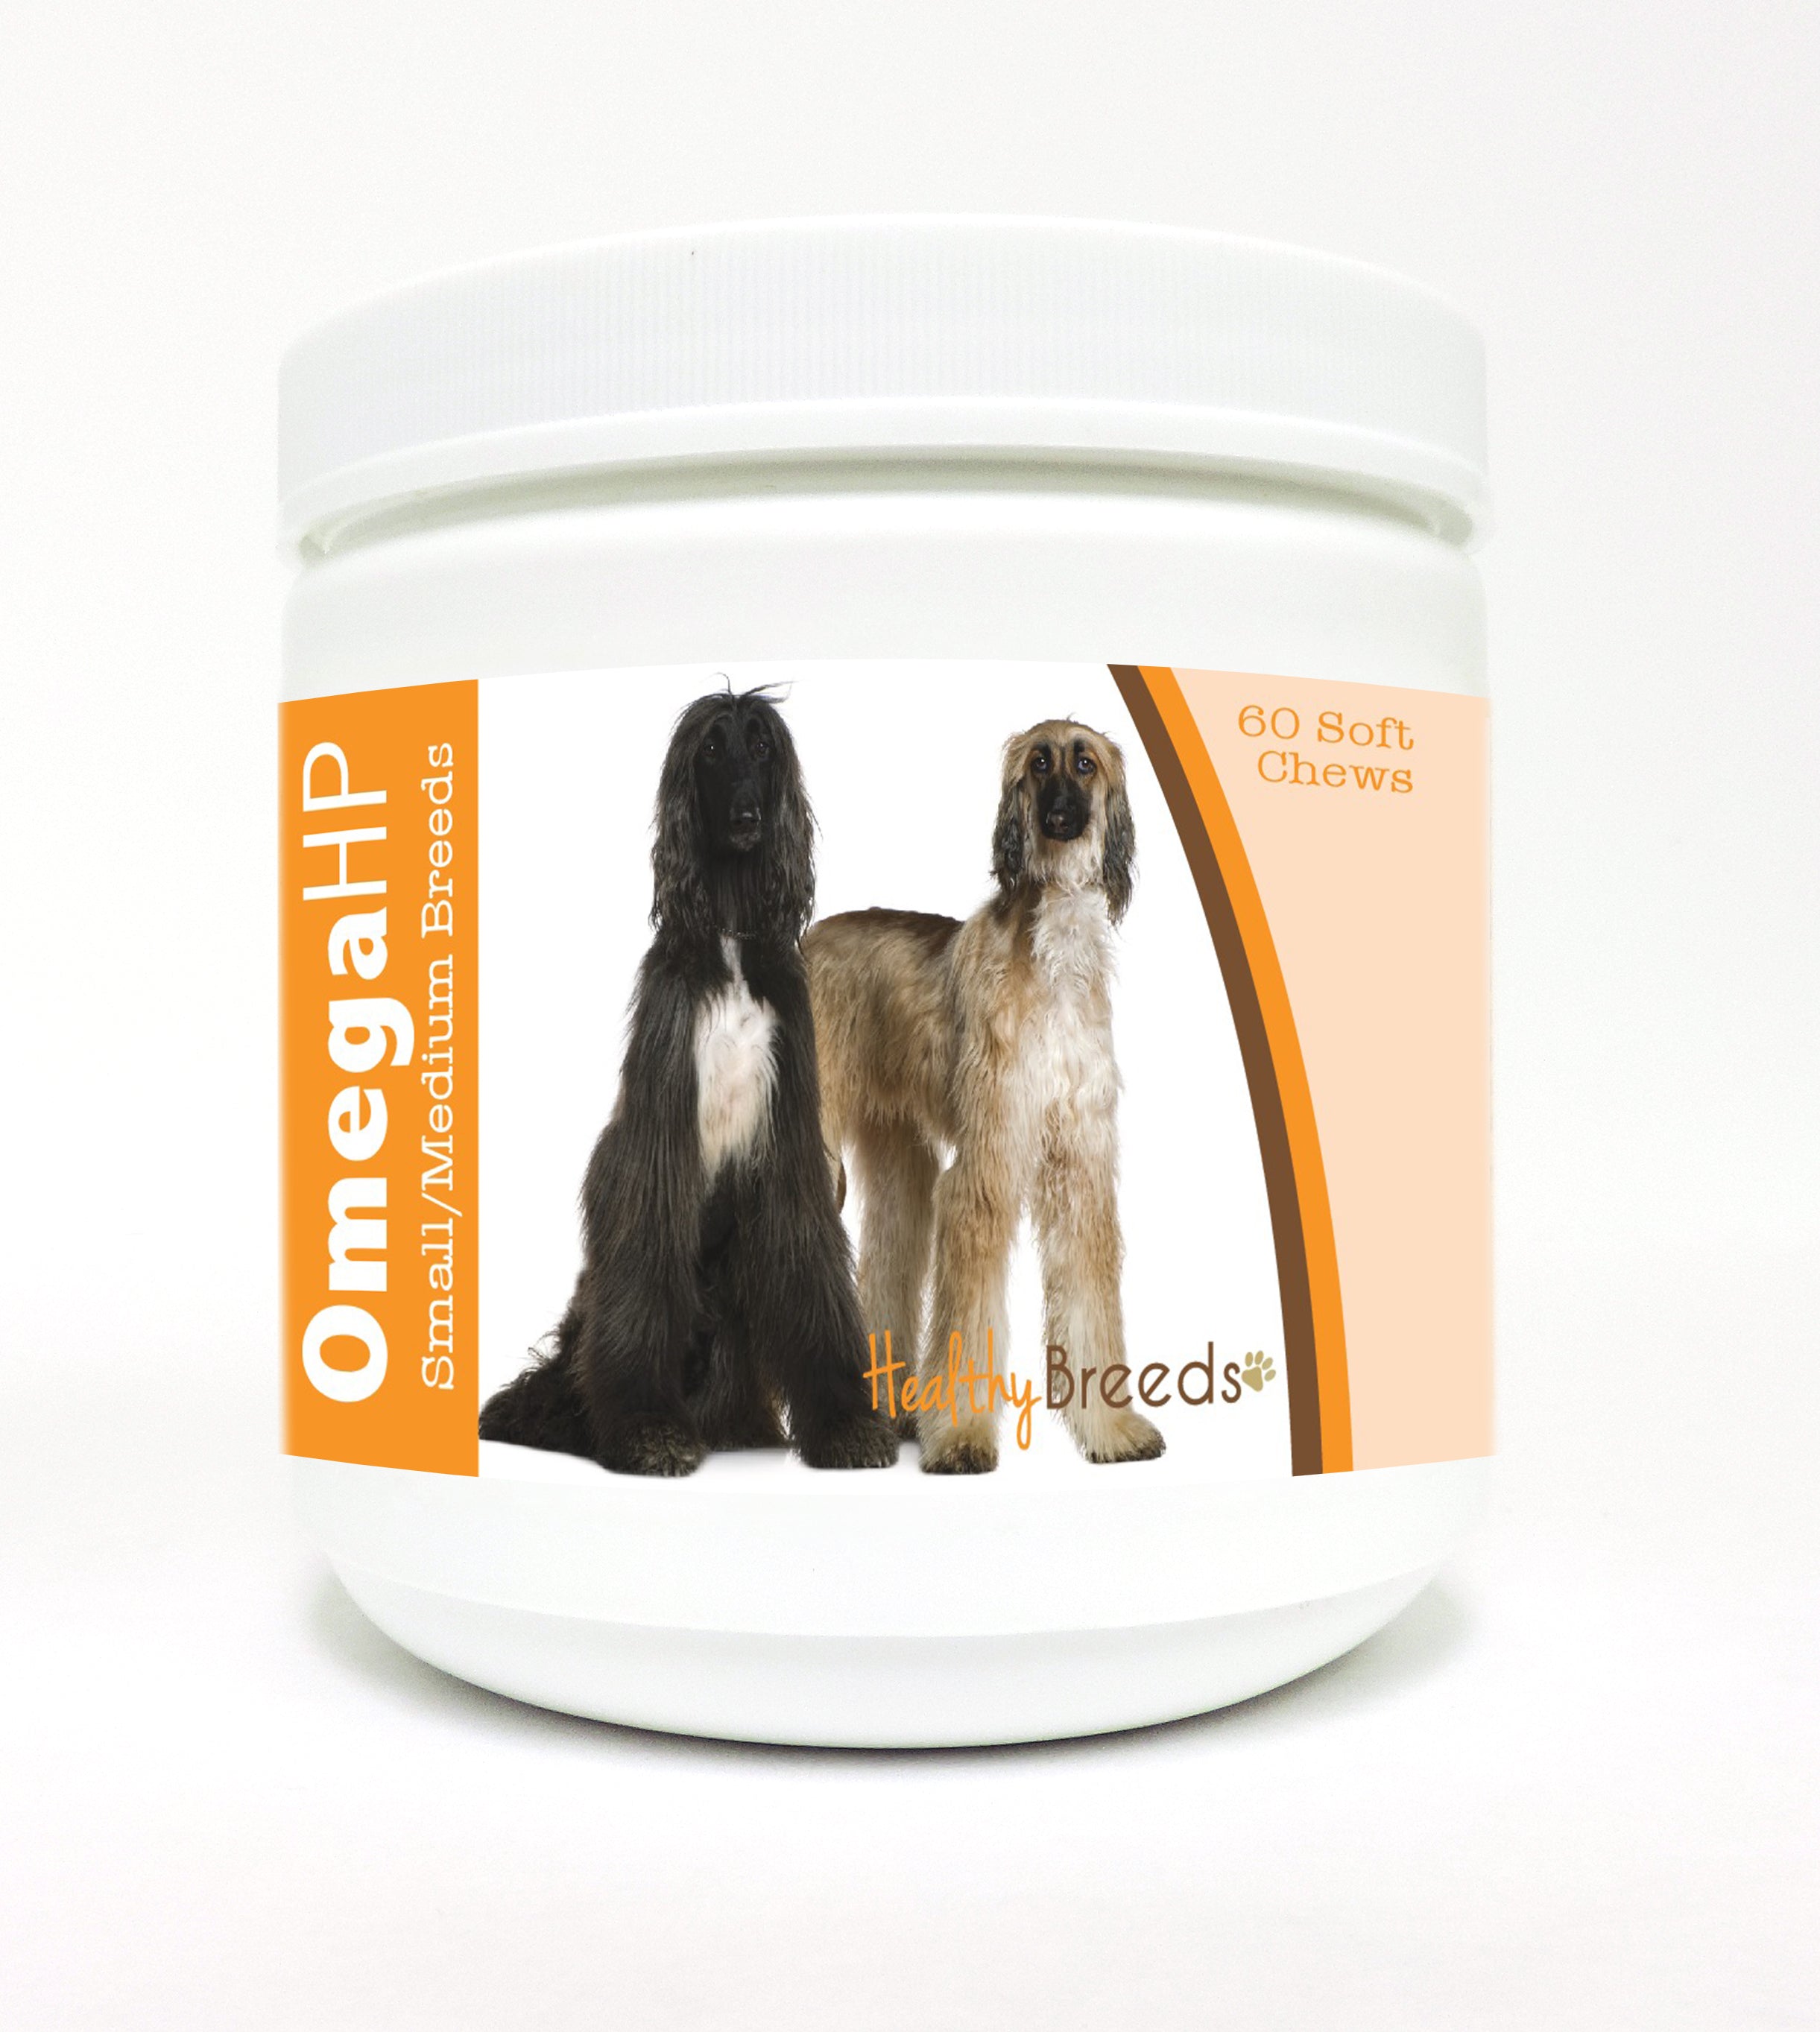 Afghan Hound Omega HP Fatty Acid Skin and Coat Support Soft Chews 60 Count